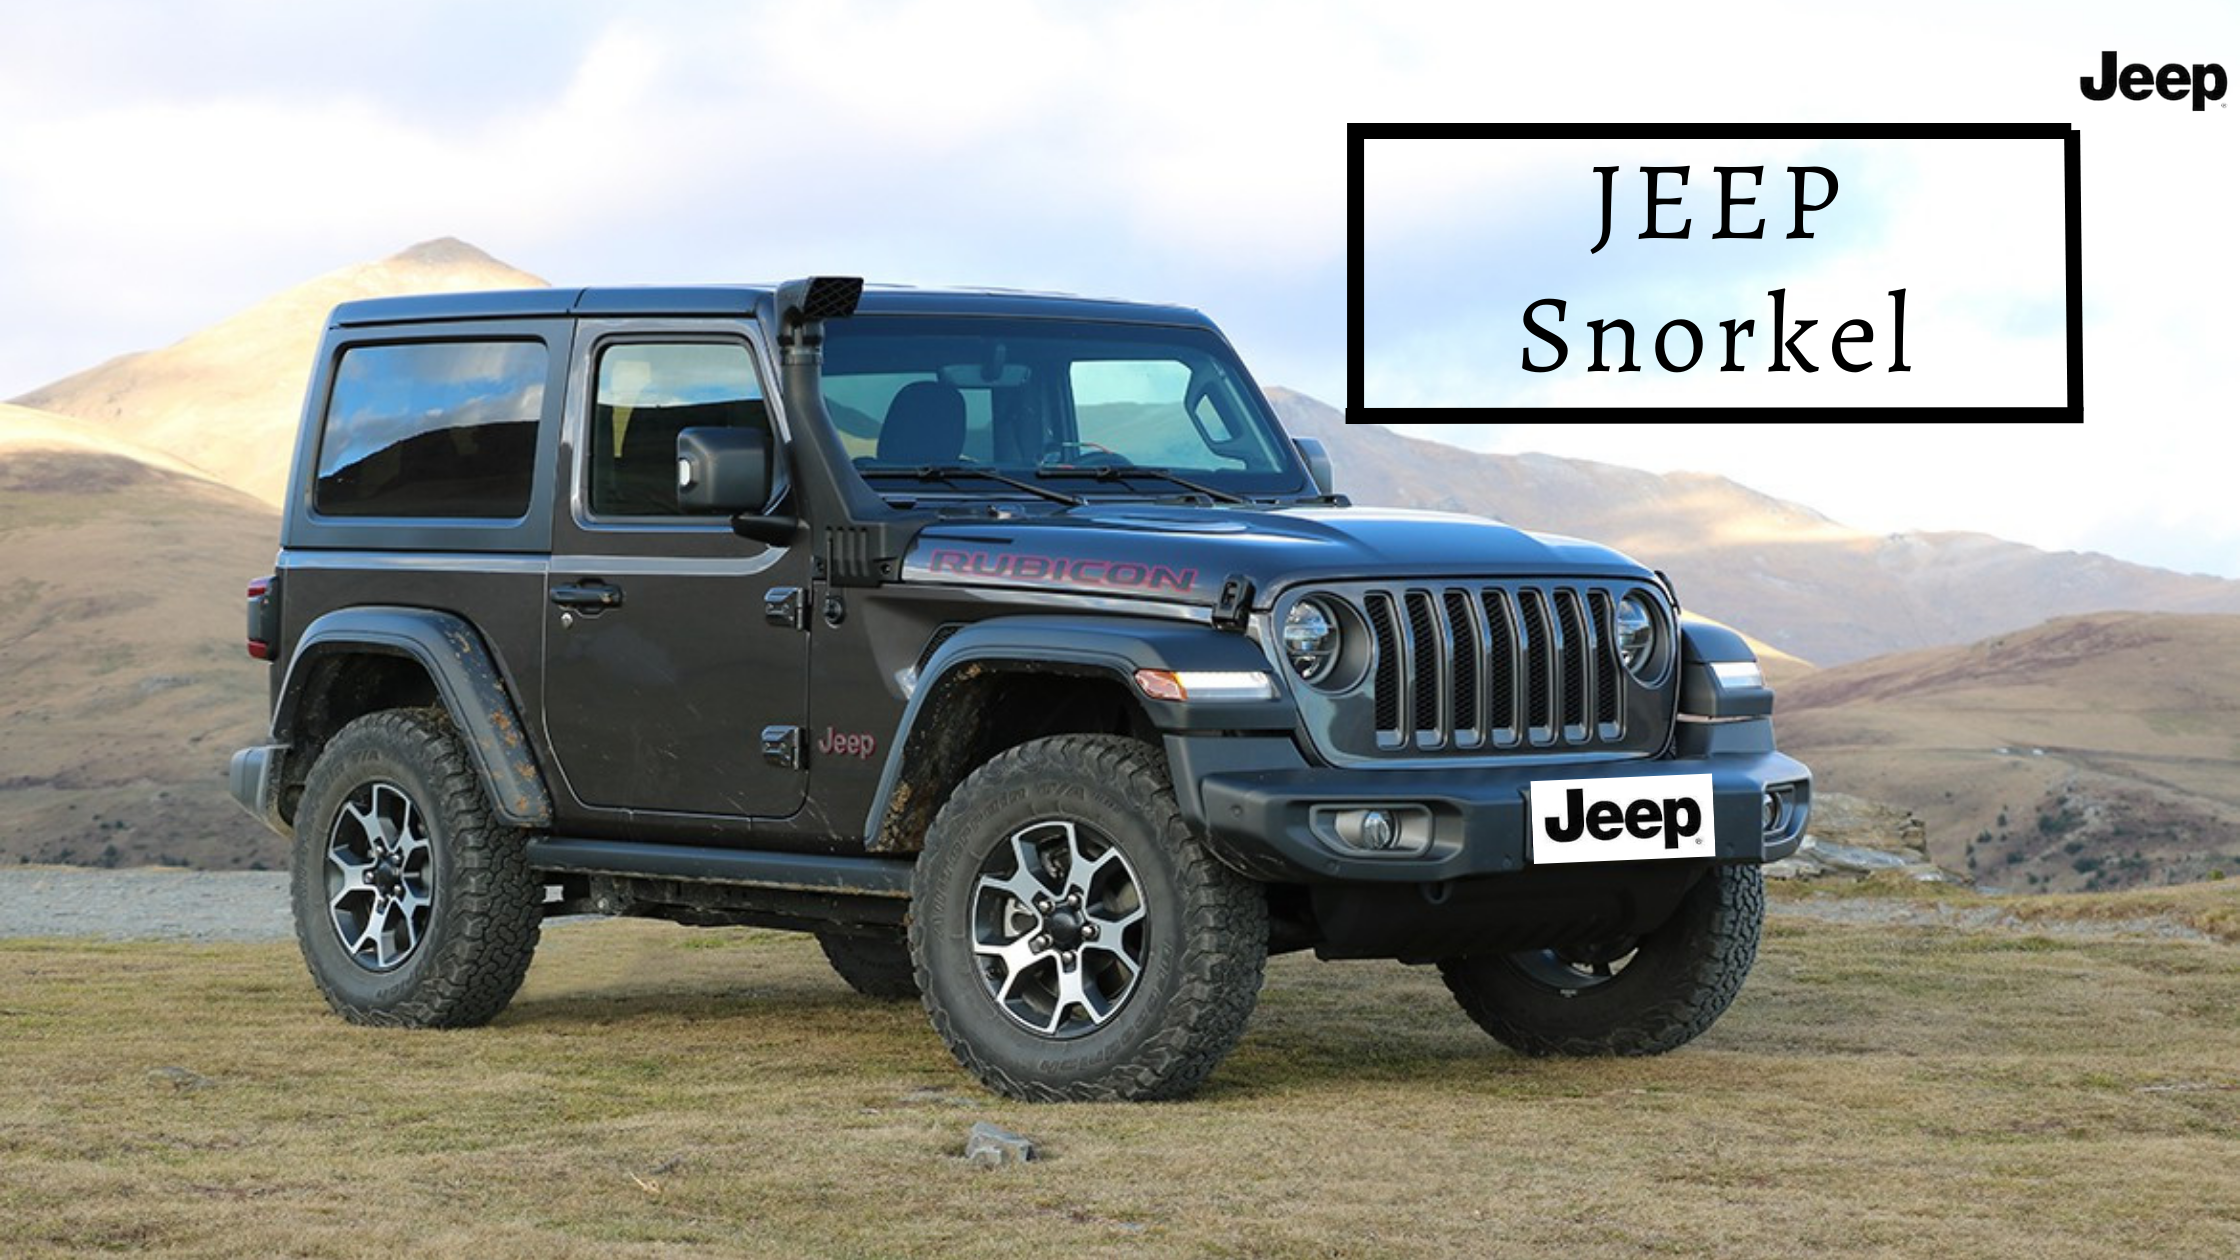 What is a Jeep Snorkel and how is it used?